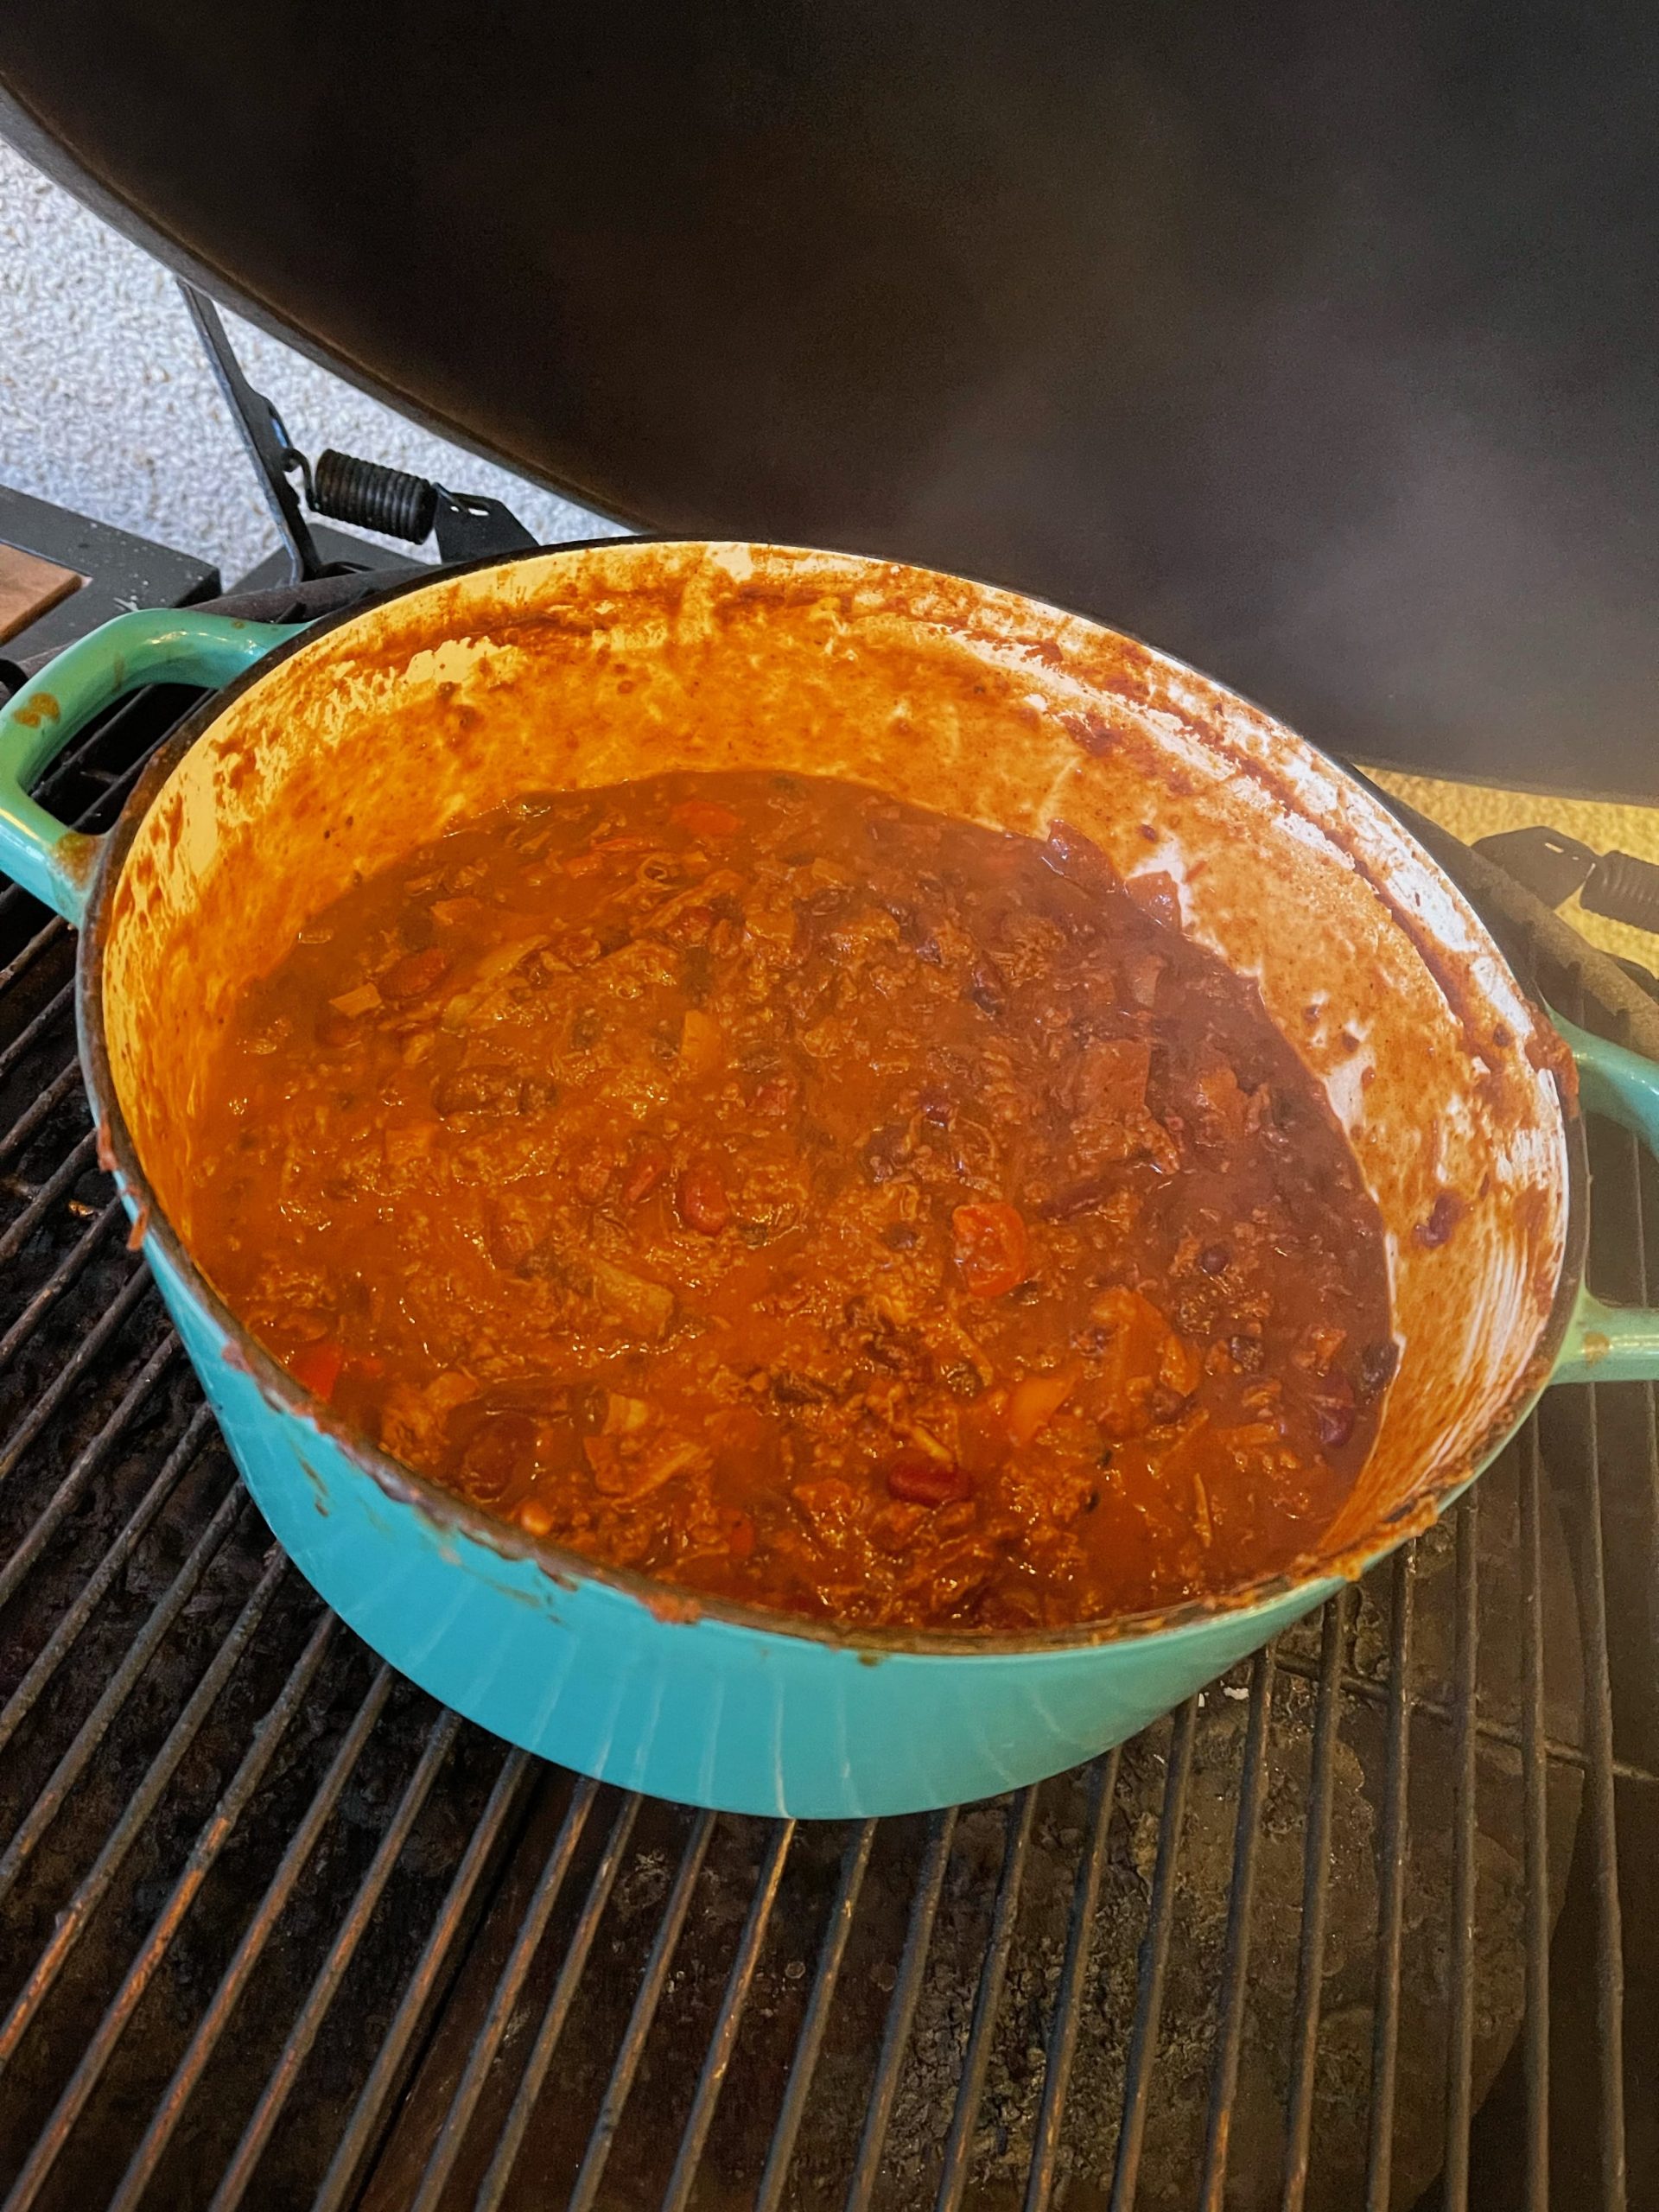 Darkside of the Grill - Shares his Game Day Brisket Chili Recipe